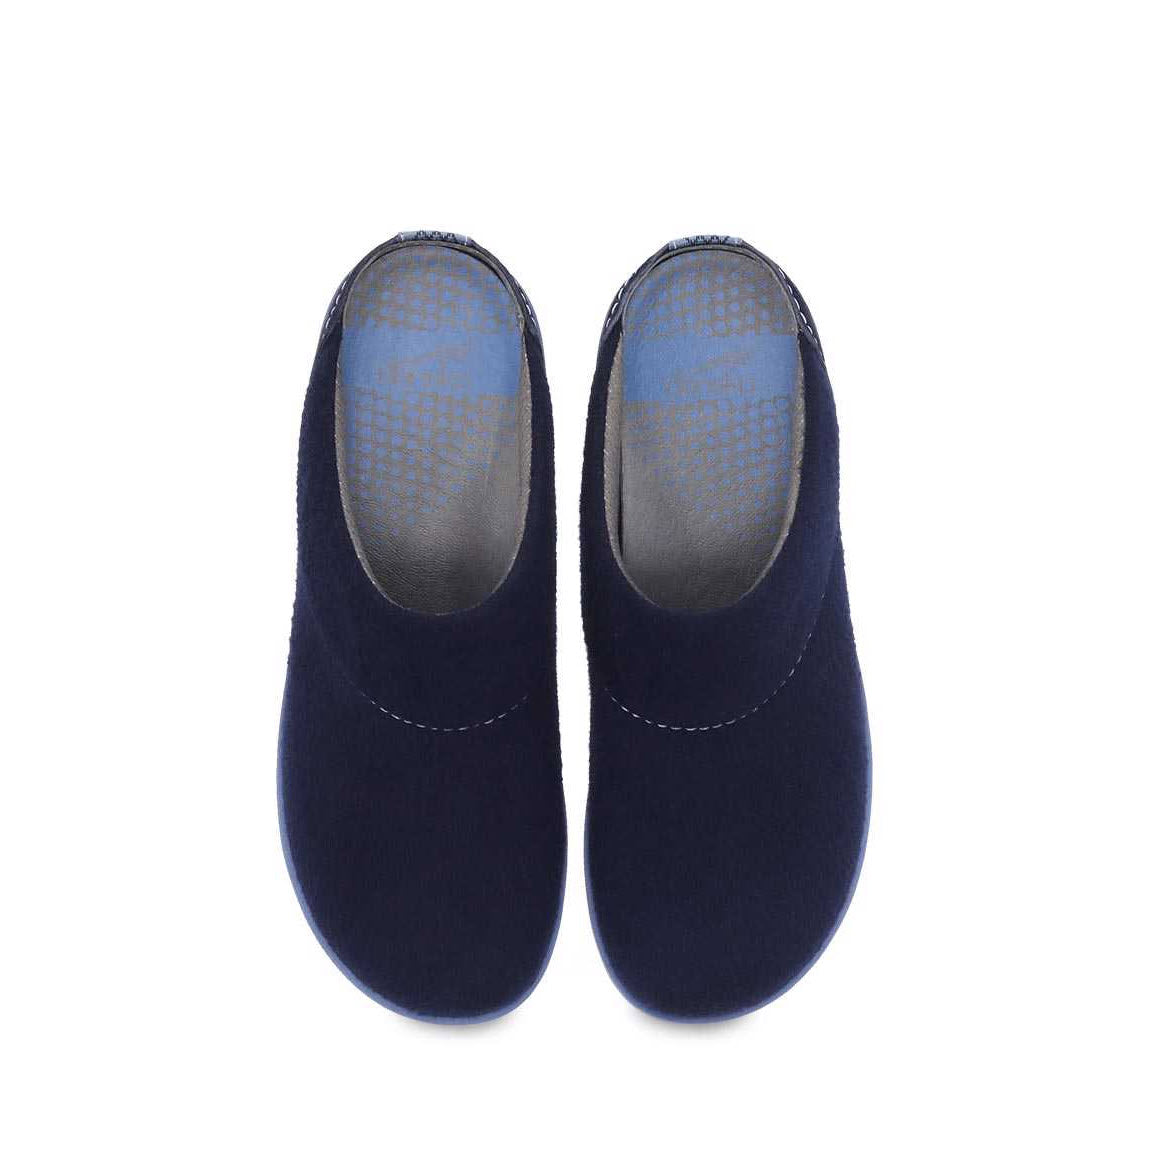 A pair of navy blue Dansko Lucie wool slip-on shoes with wool blend uppers displayed on a white background.